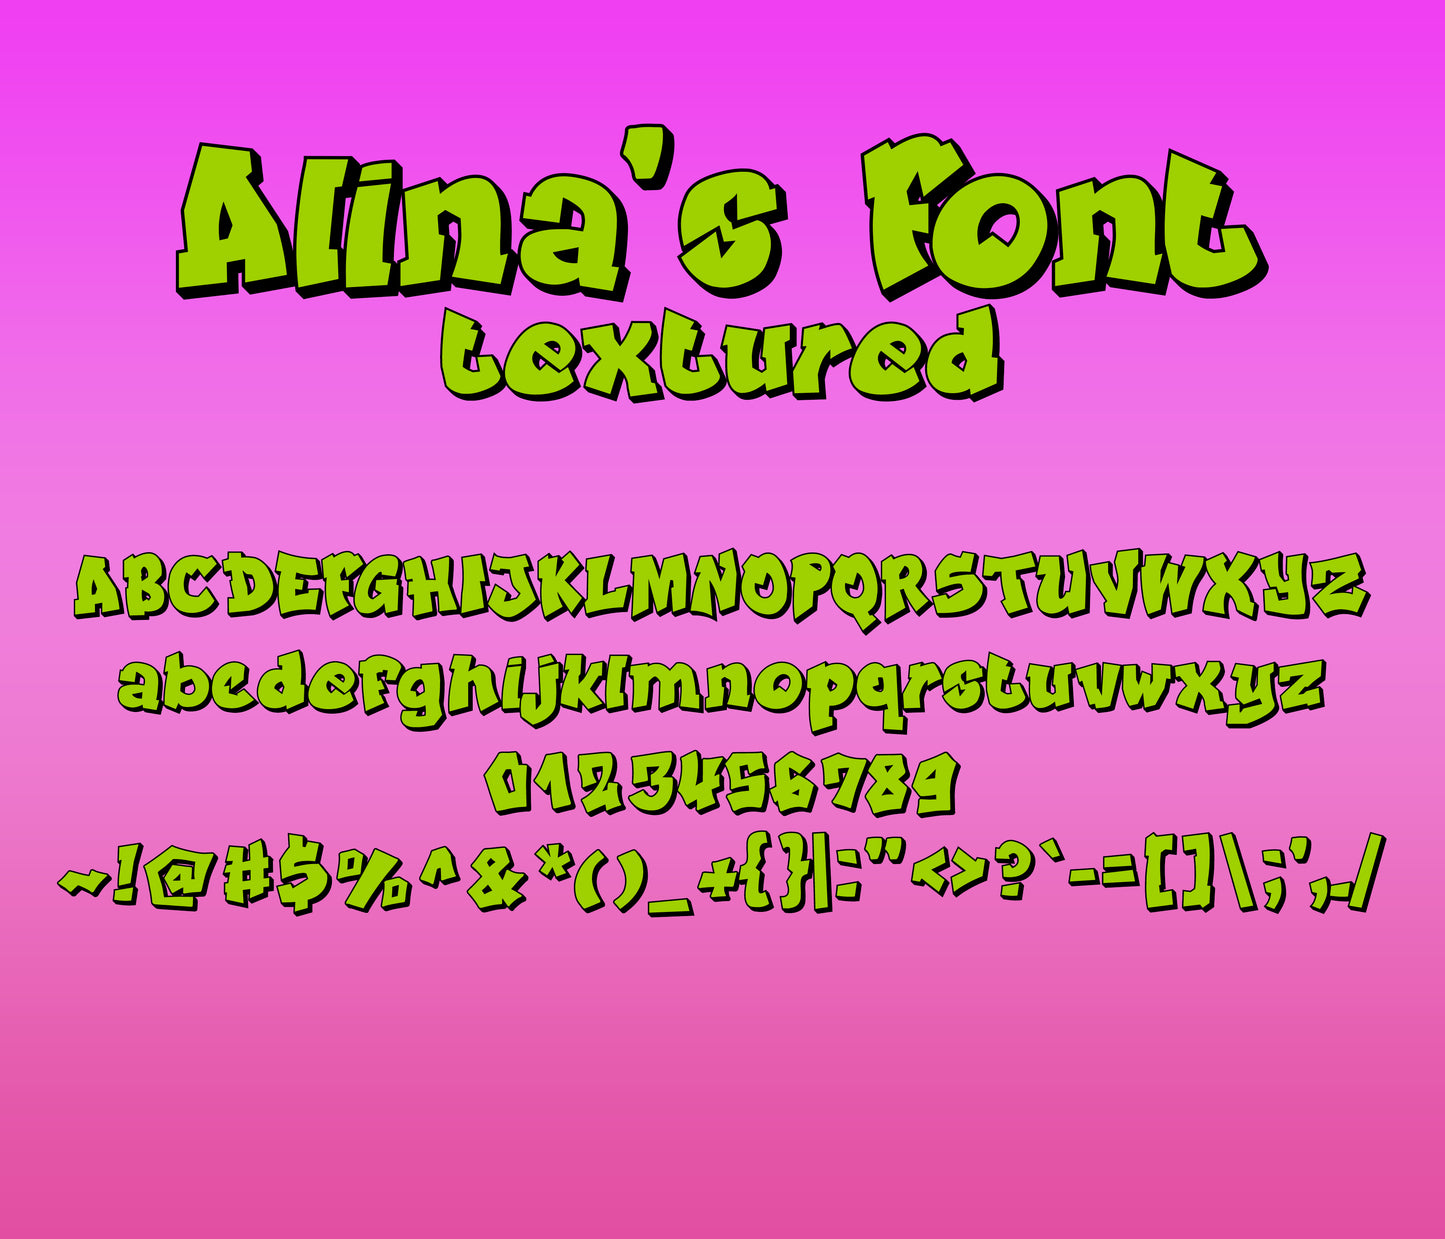 Fresh Prince-Inspired Font